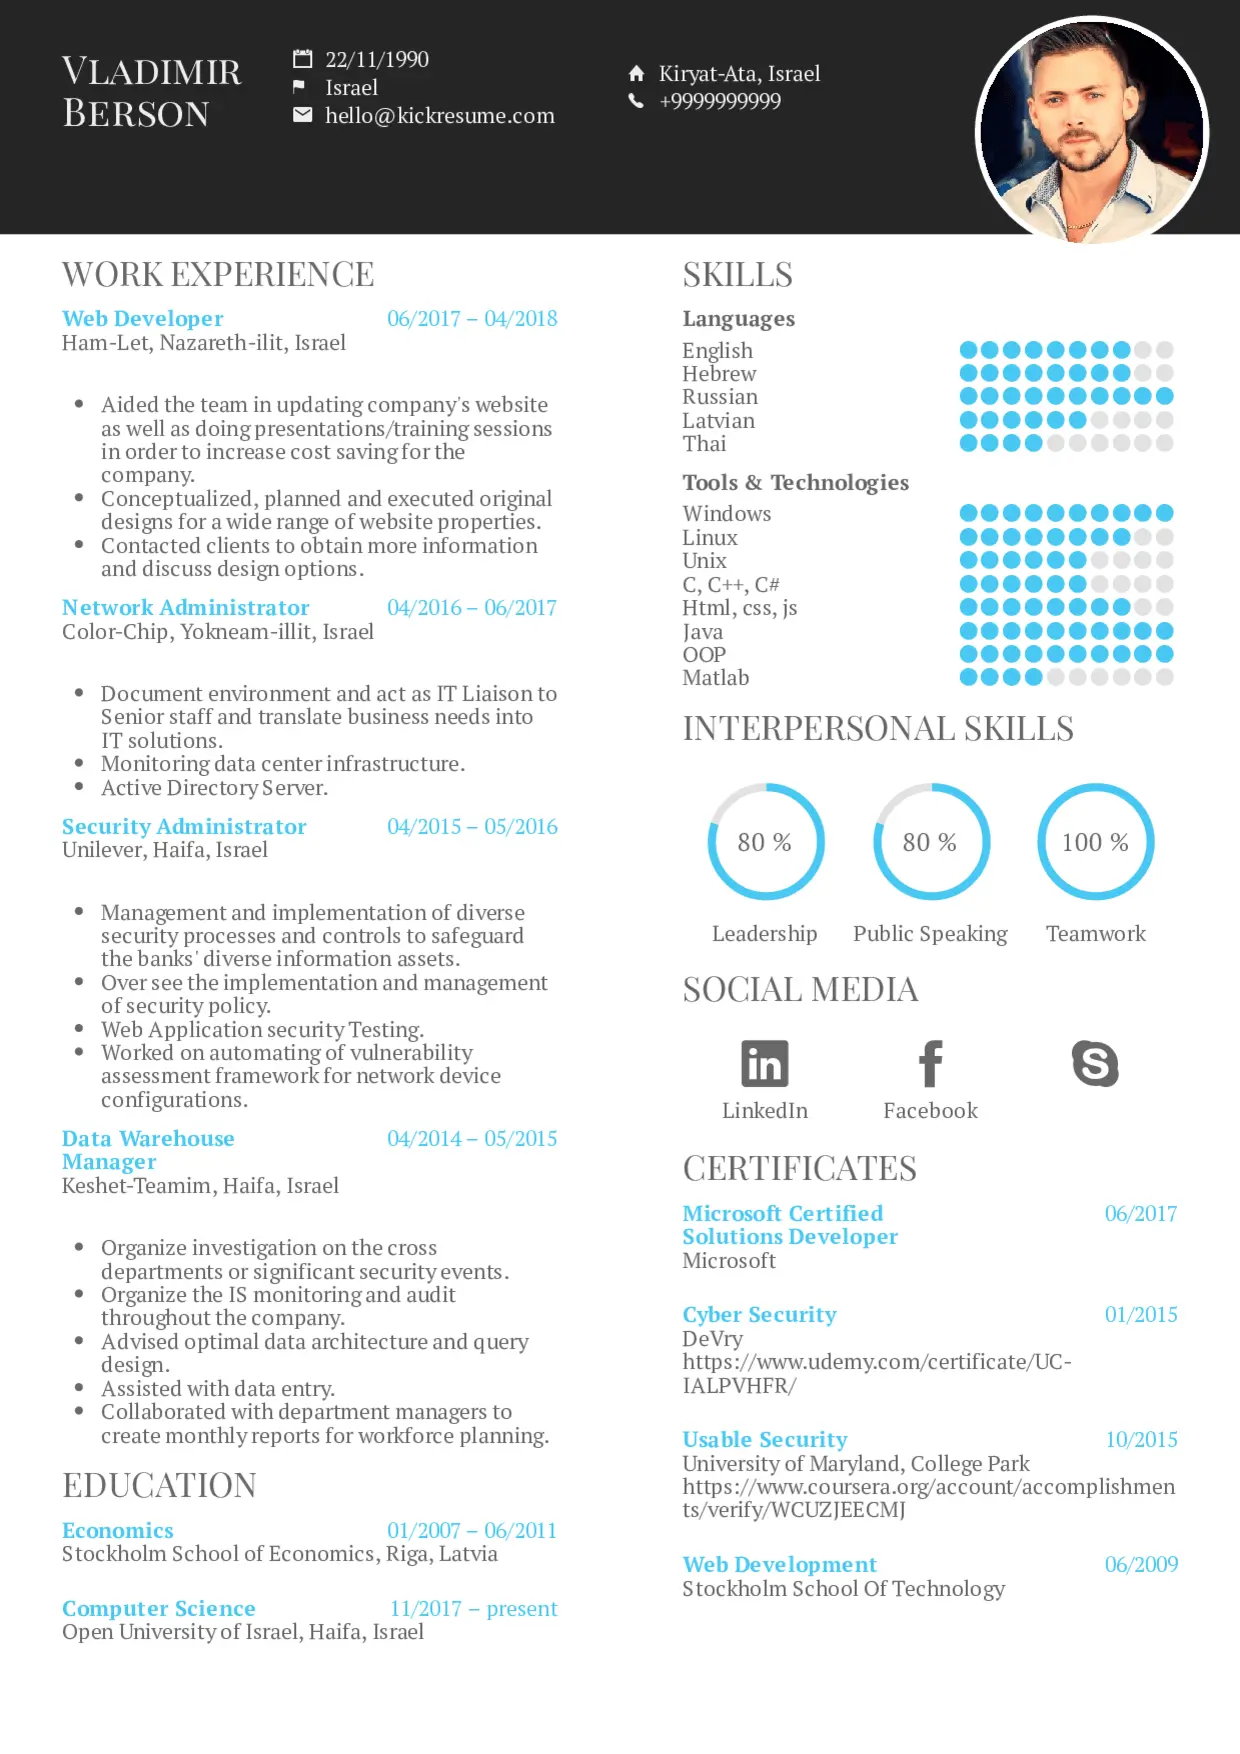 CV vs Resume: Is There Even a Difference? (+Examples)